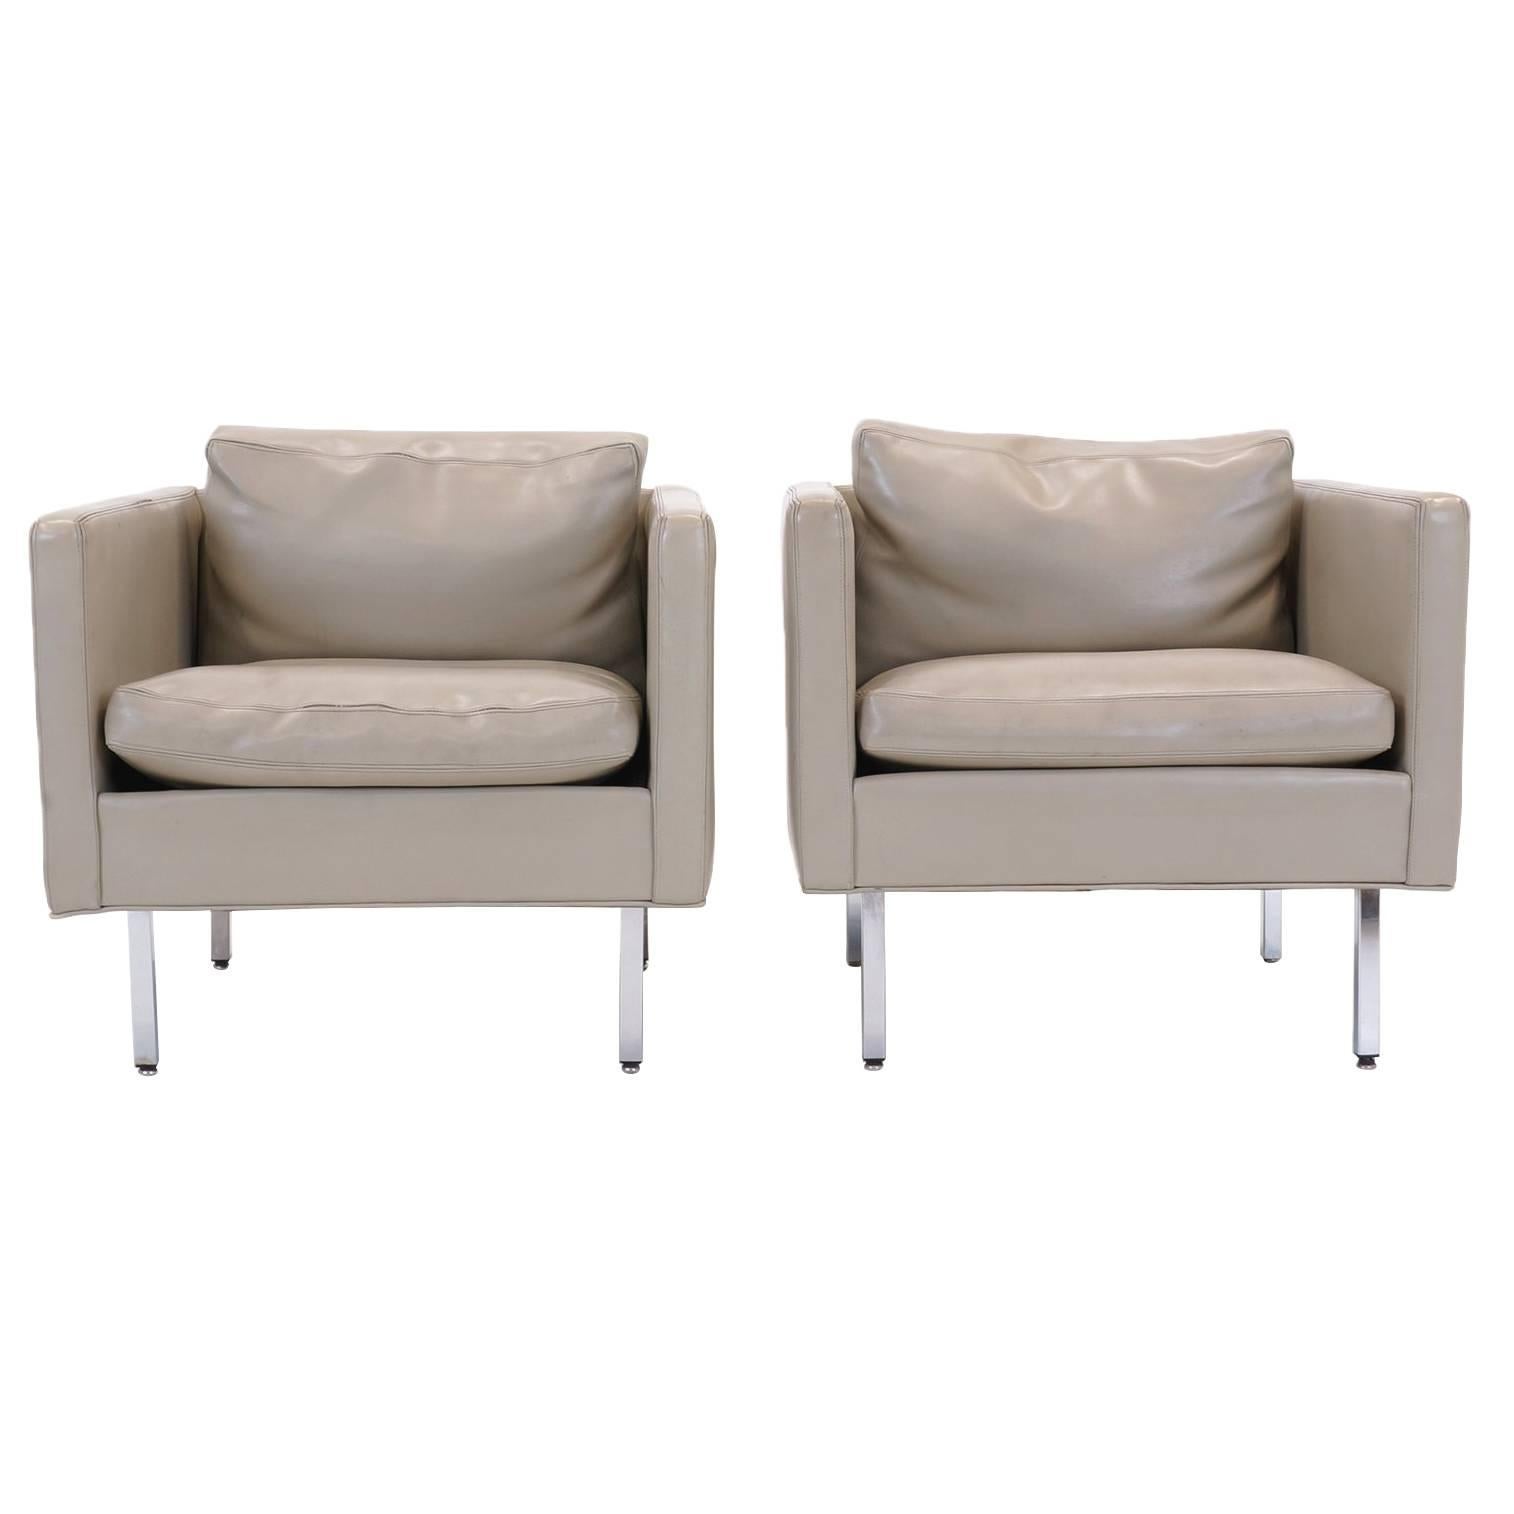 Pair of Even Arm Cube Lounge Chairs by Milo Baughman for Thayer Coggin